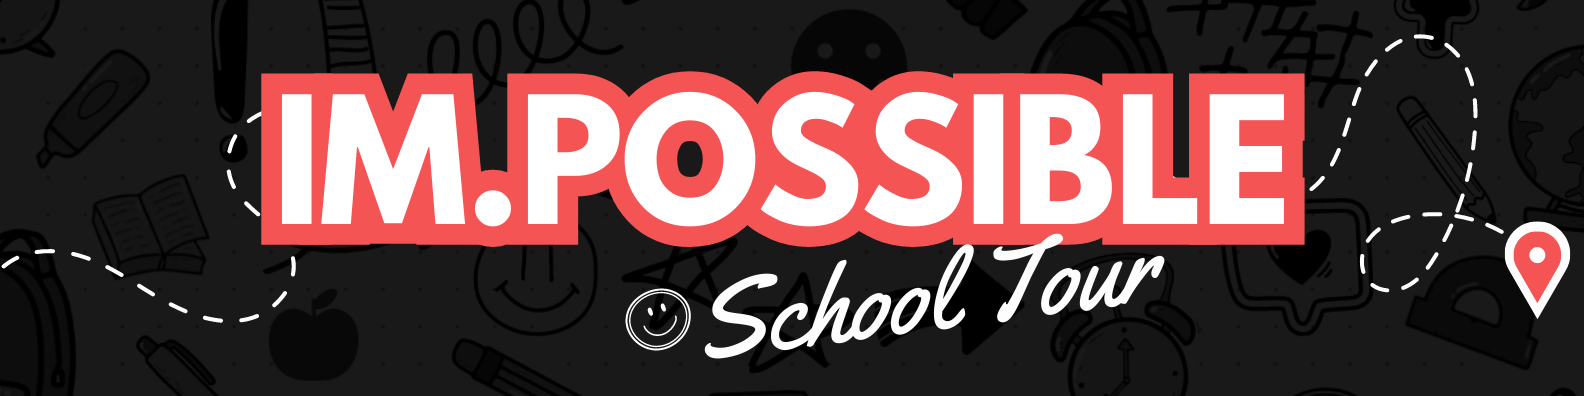 Middle School Assembly Program, IM.POSSIBLE